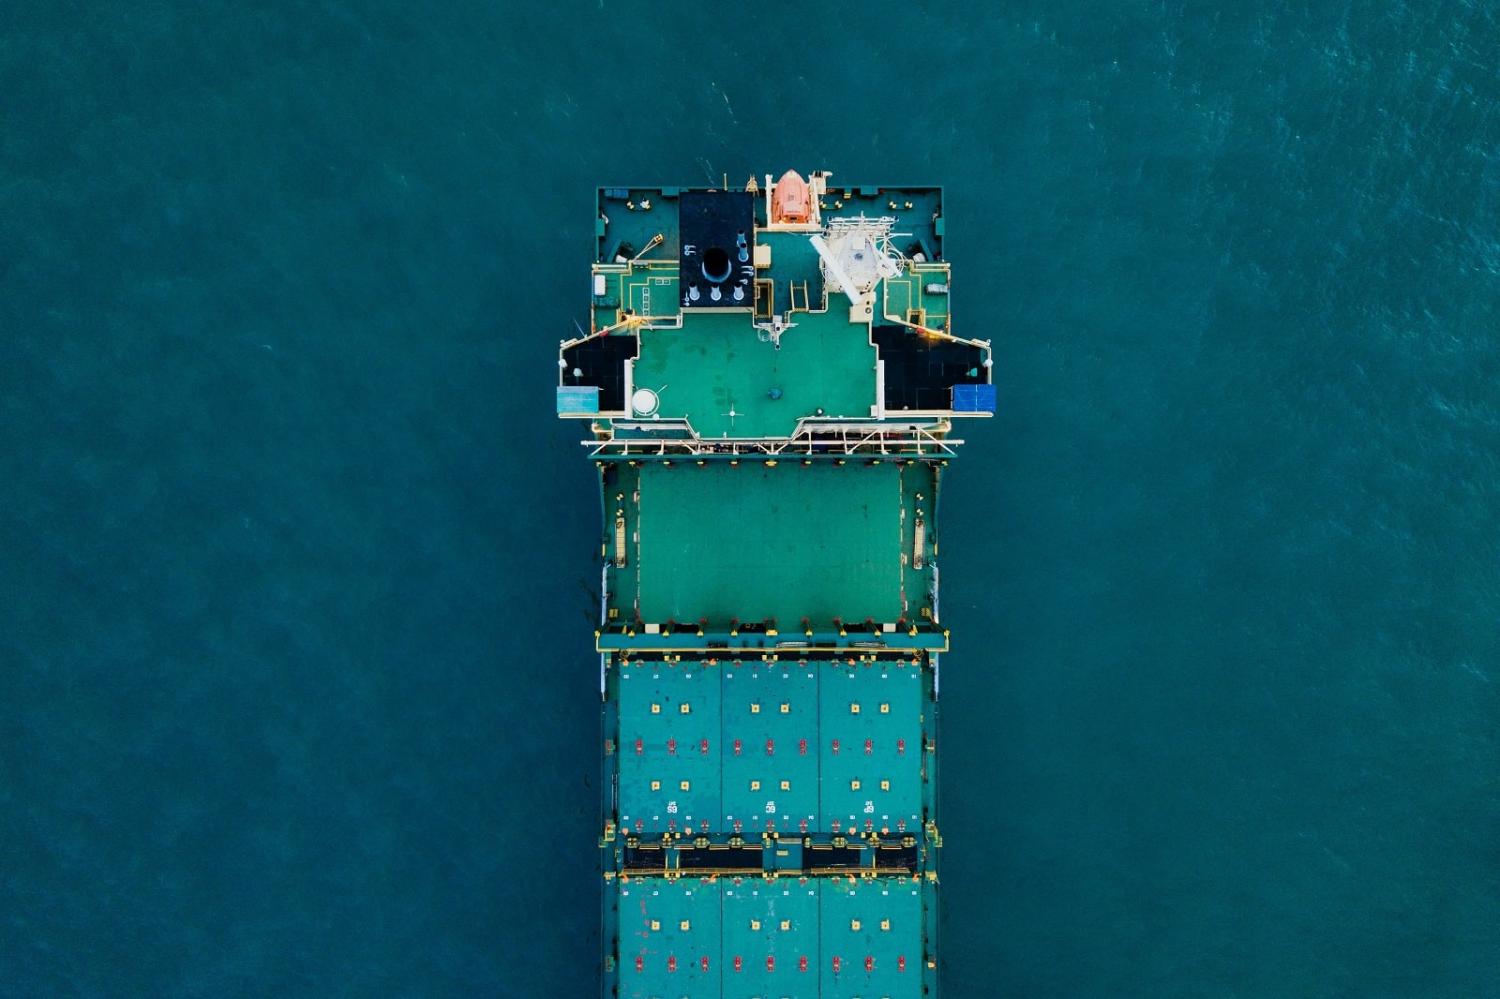 Southeast Asian waters are of geostrategic importance to global shipping routes, maritime trade, and networks of port hubs (Chuttersnap/Unsplash)